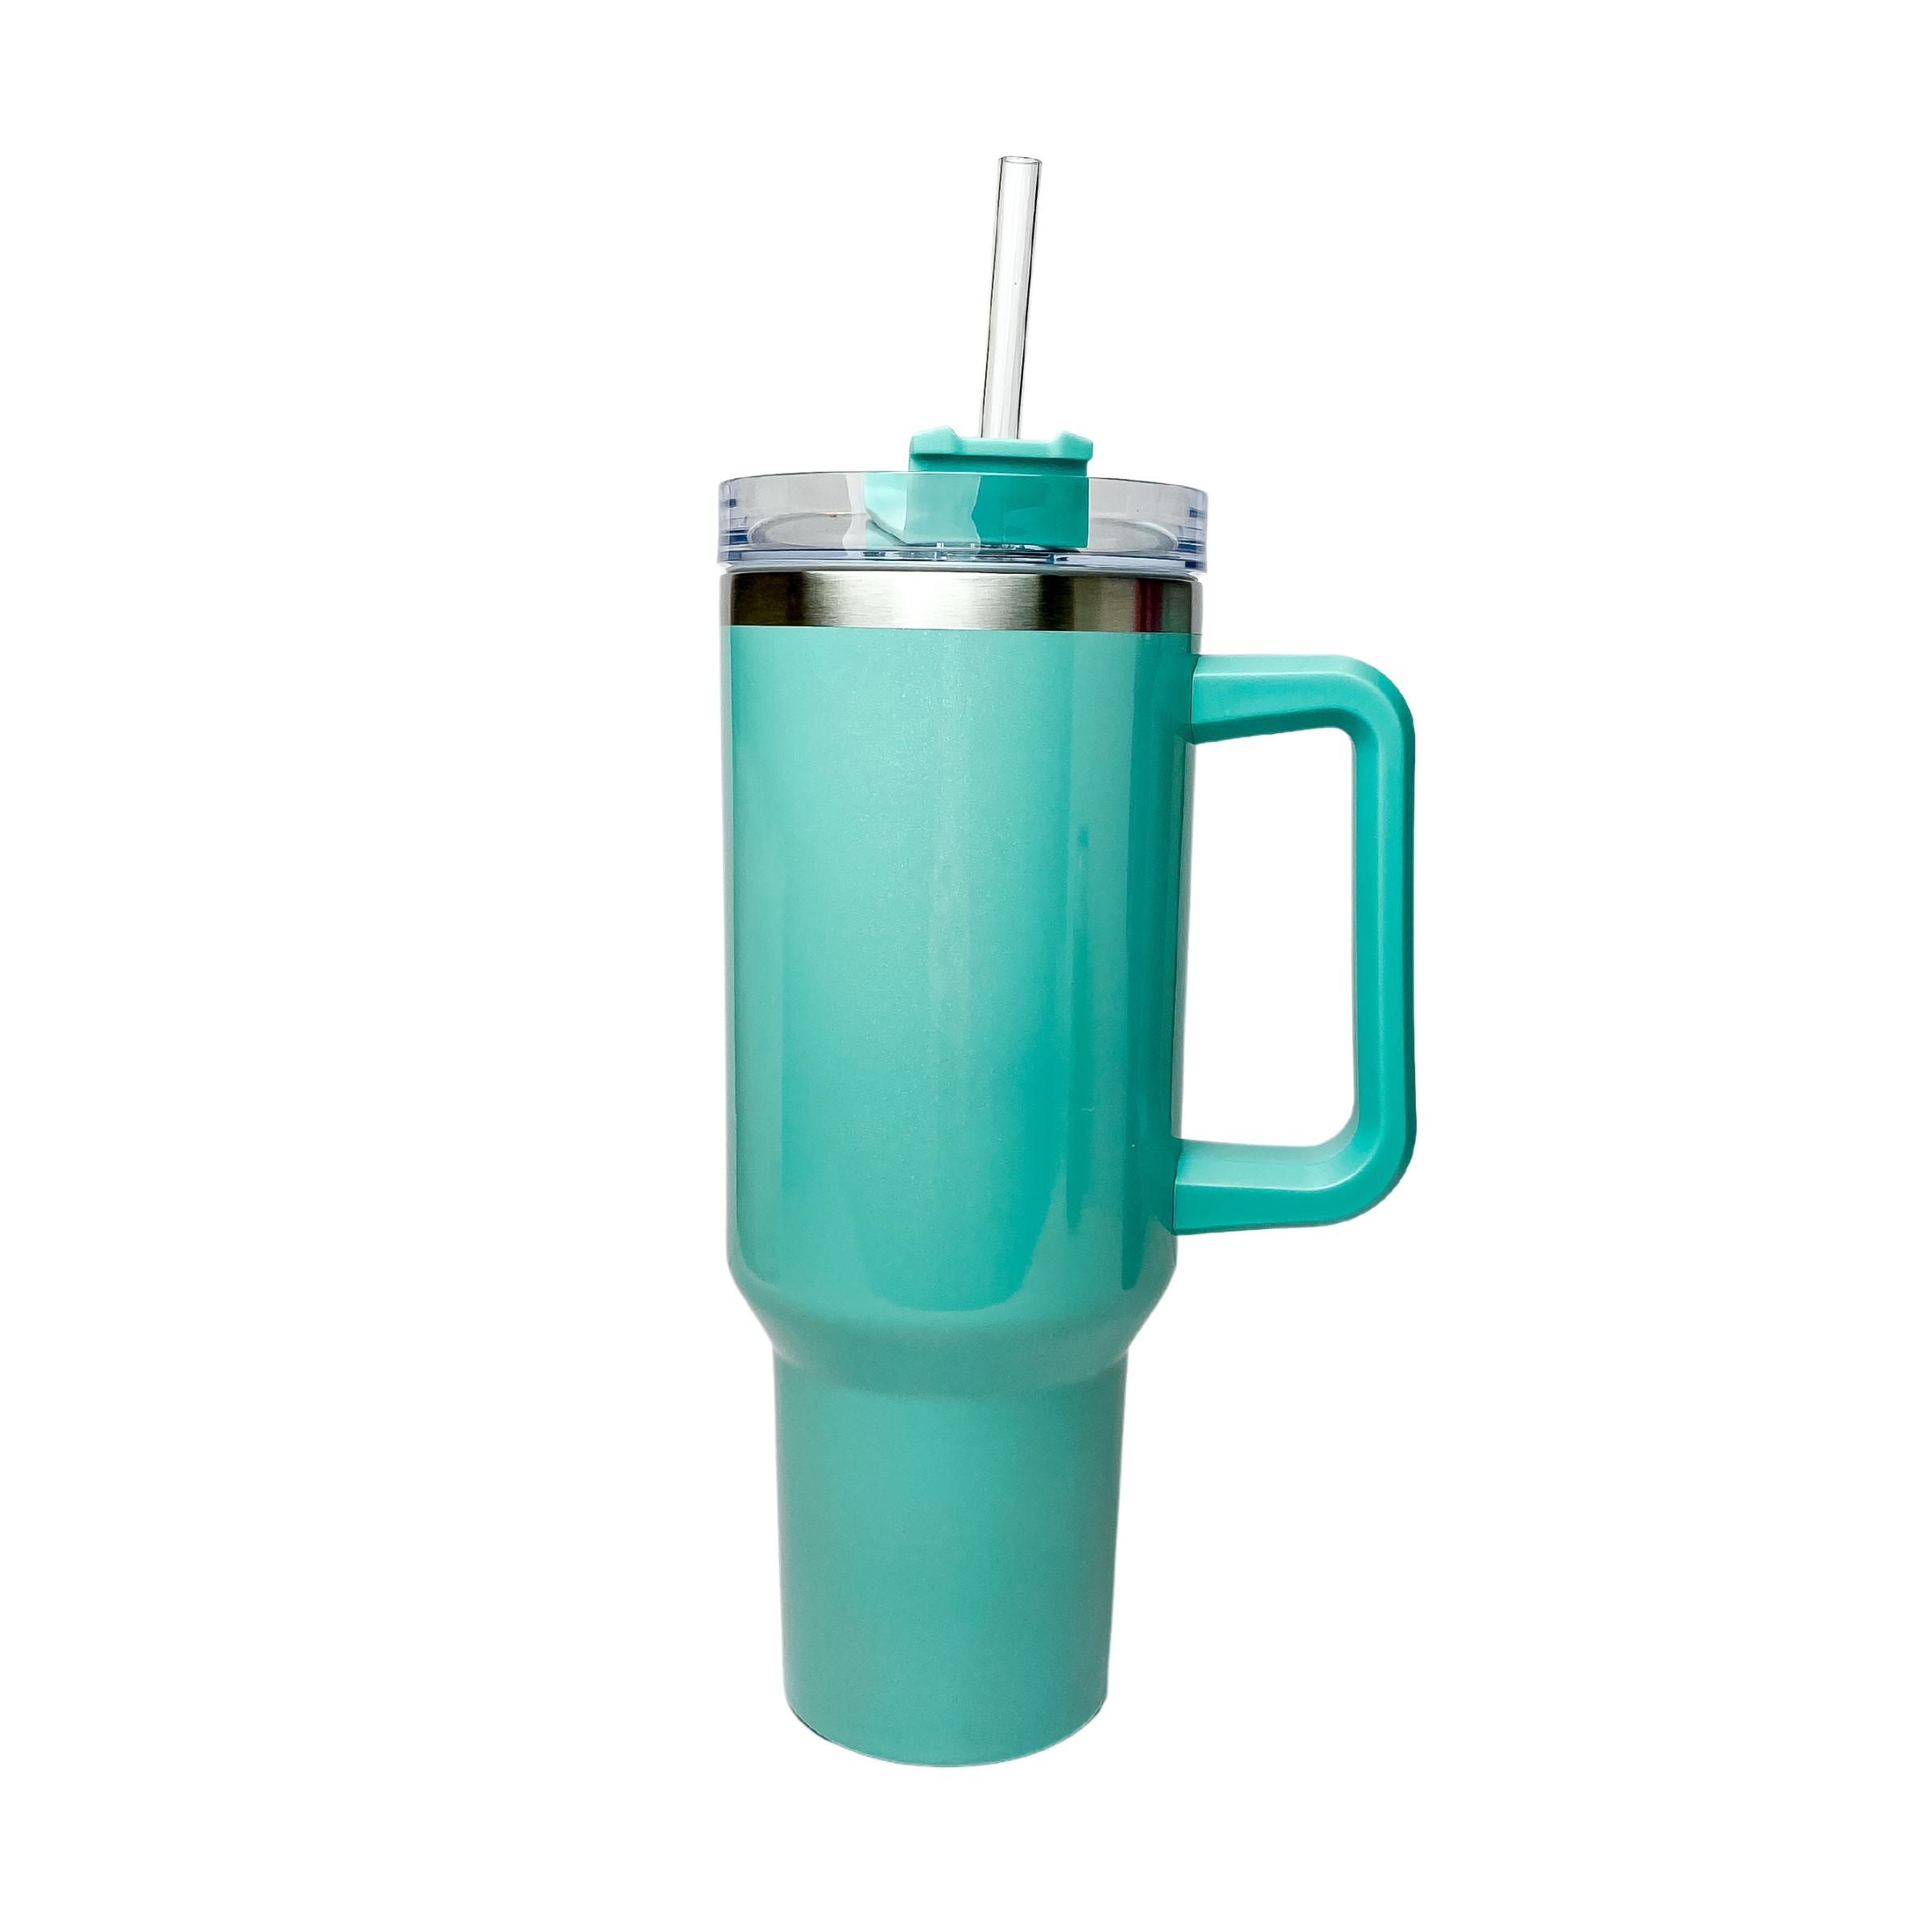 Pictured is a turquoise shimmer tumbler with a handle and clear straw. This tumbler is pictured on a white background.